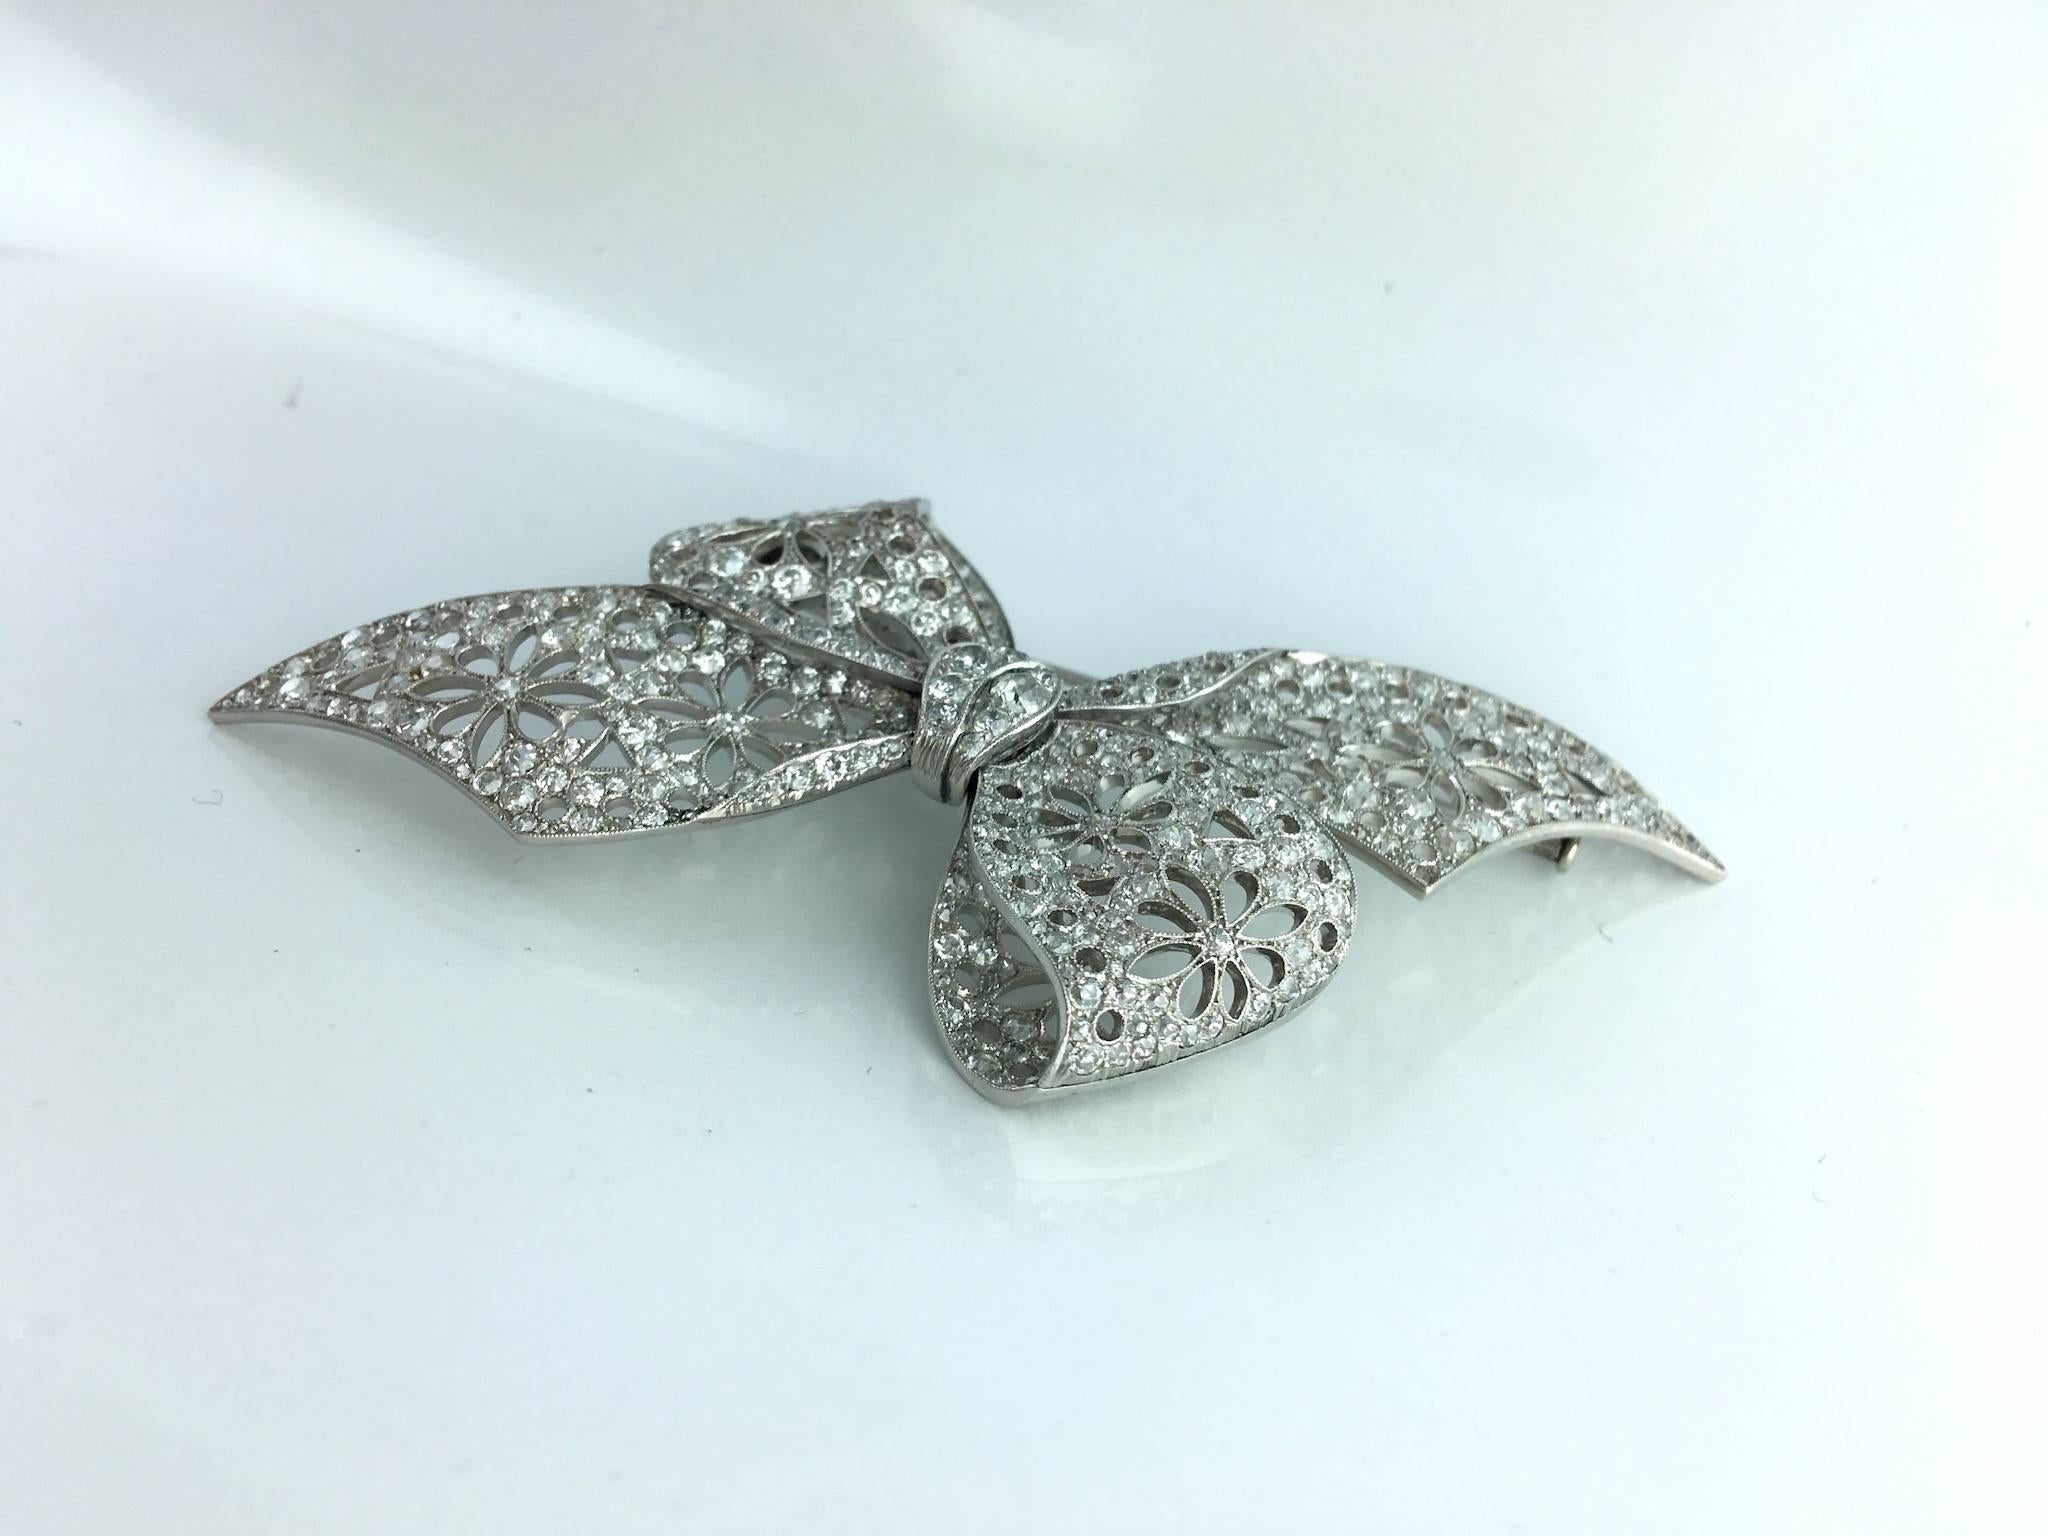 This piece is so delicate! The lace is realistic and the work of the goldsmith is incredible. The design is between Belle Epoque and Art Deco. All platinum and Old-mine cut diamond.
The pin is in white gold 750 18k as usual.

The size is impressive